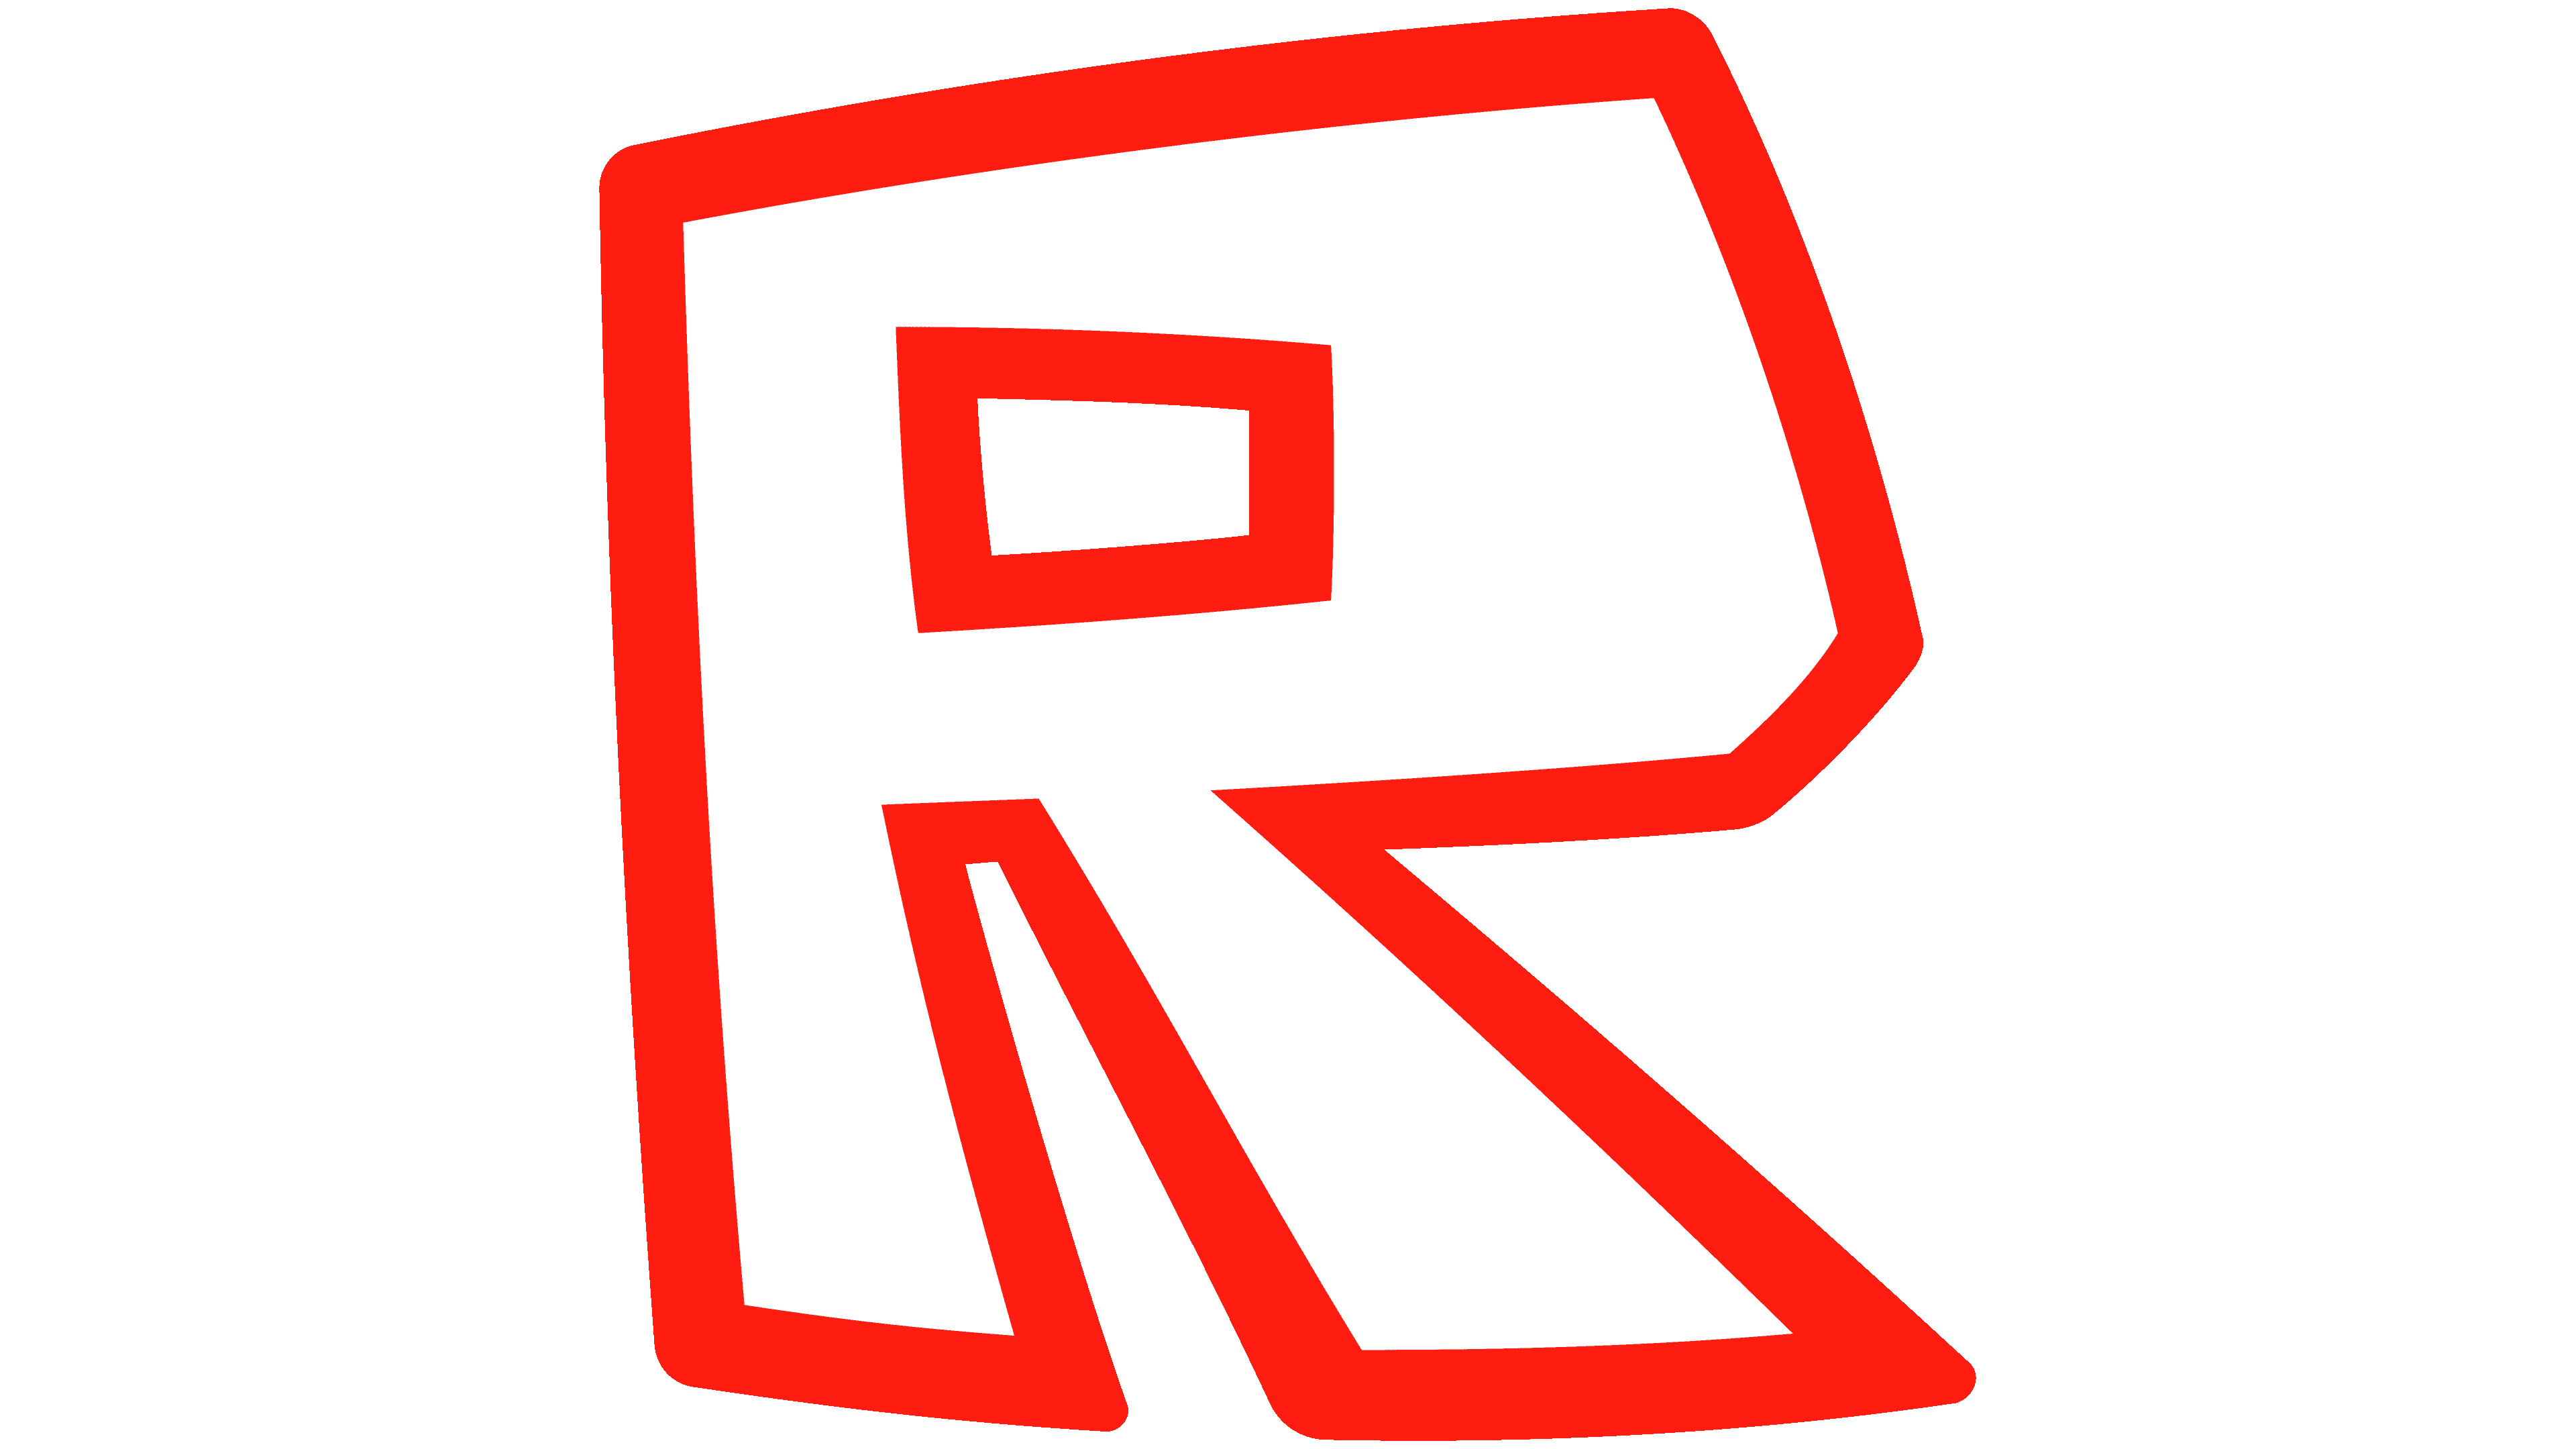 Roblox New Logo Png 2022 HD Strocke Black png - Free PNG Images in